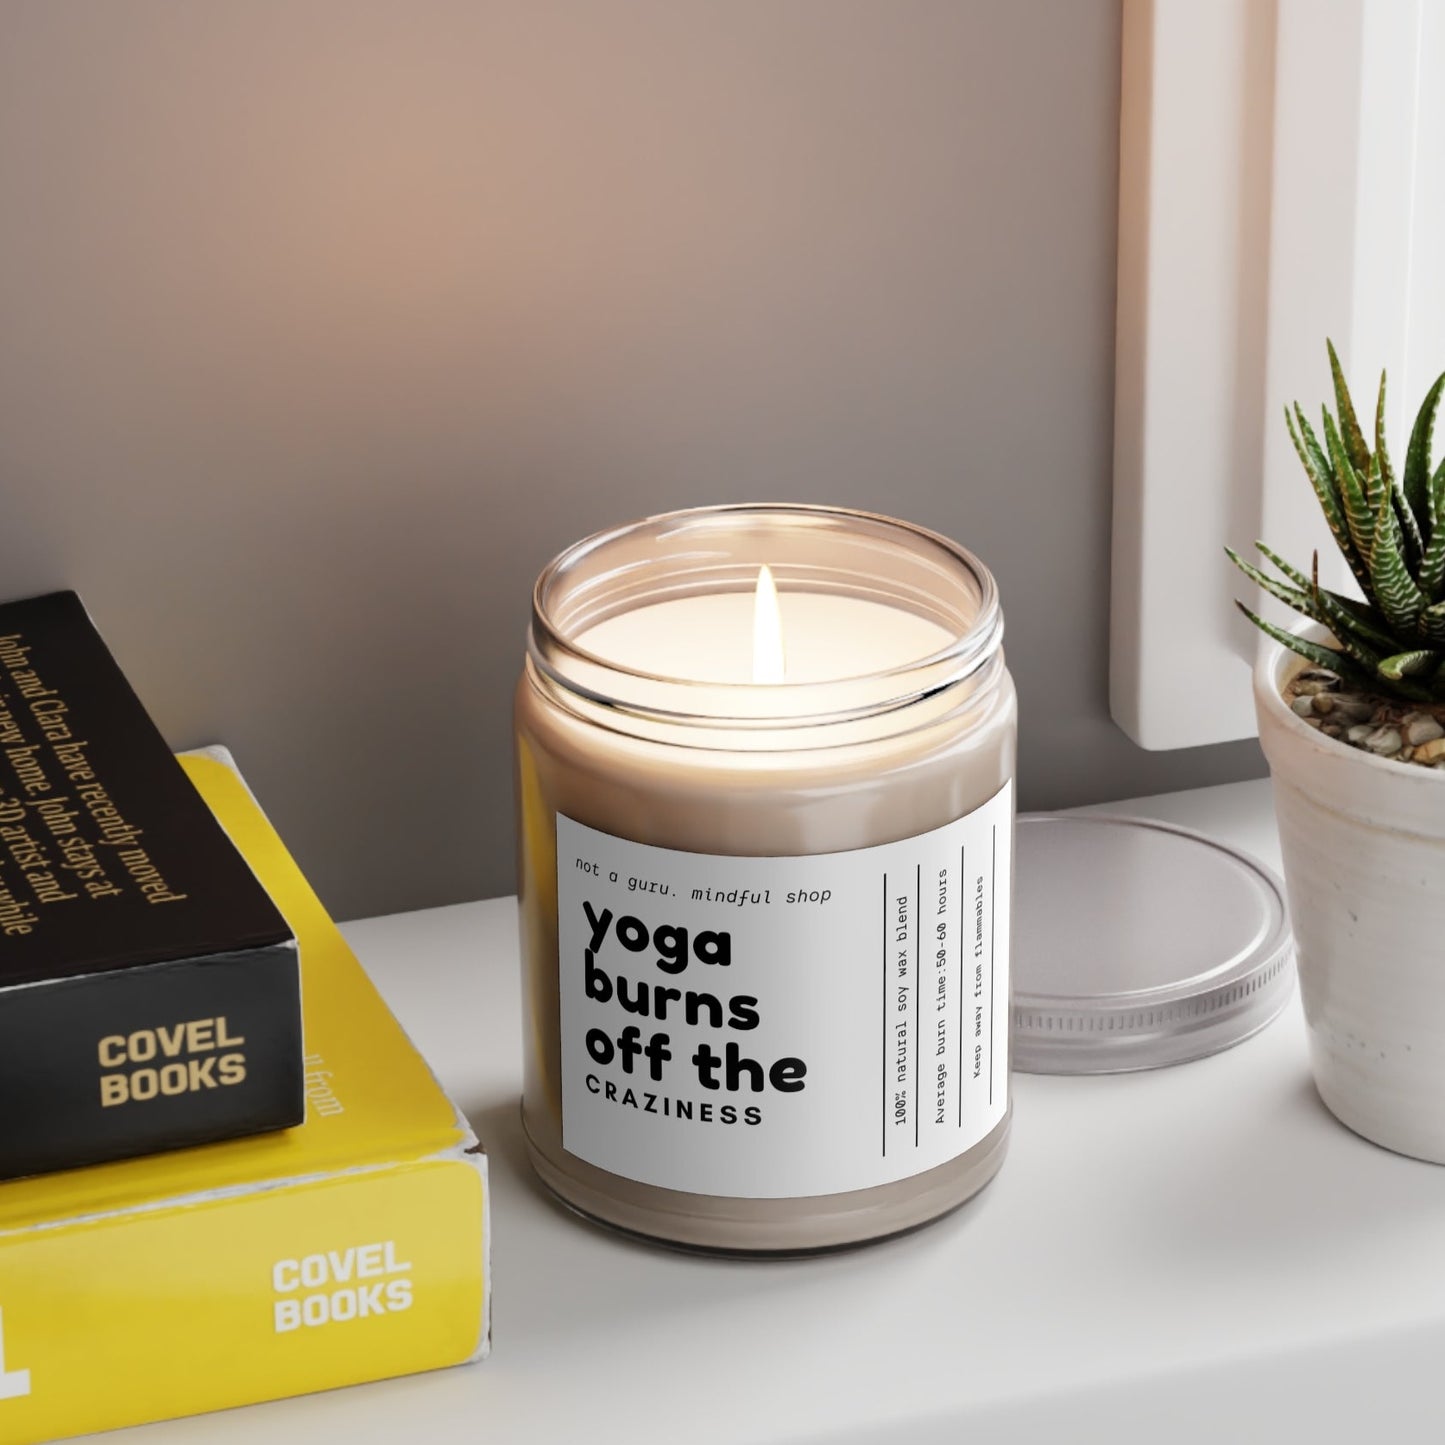 Yoga Burns Off the Craziness Scented Candles